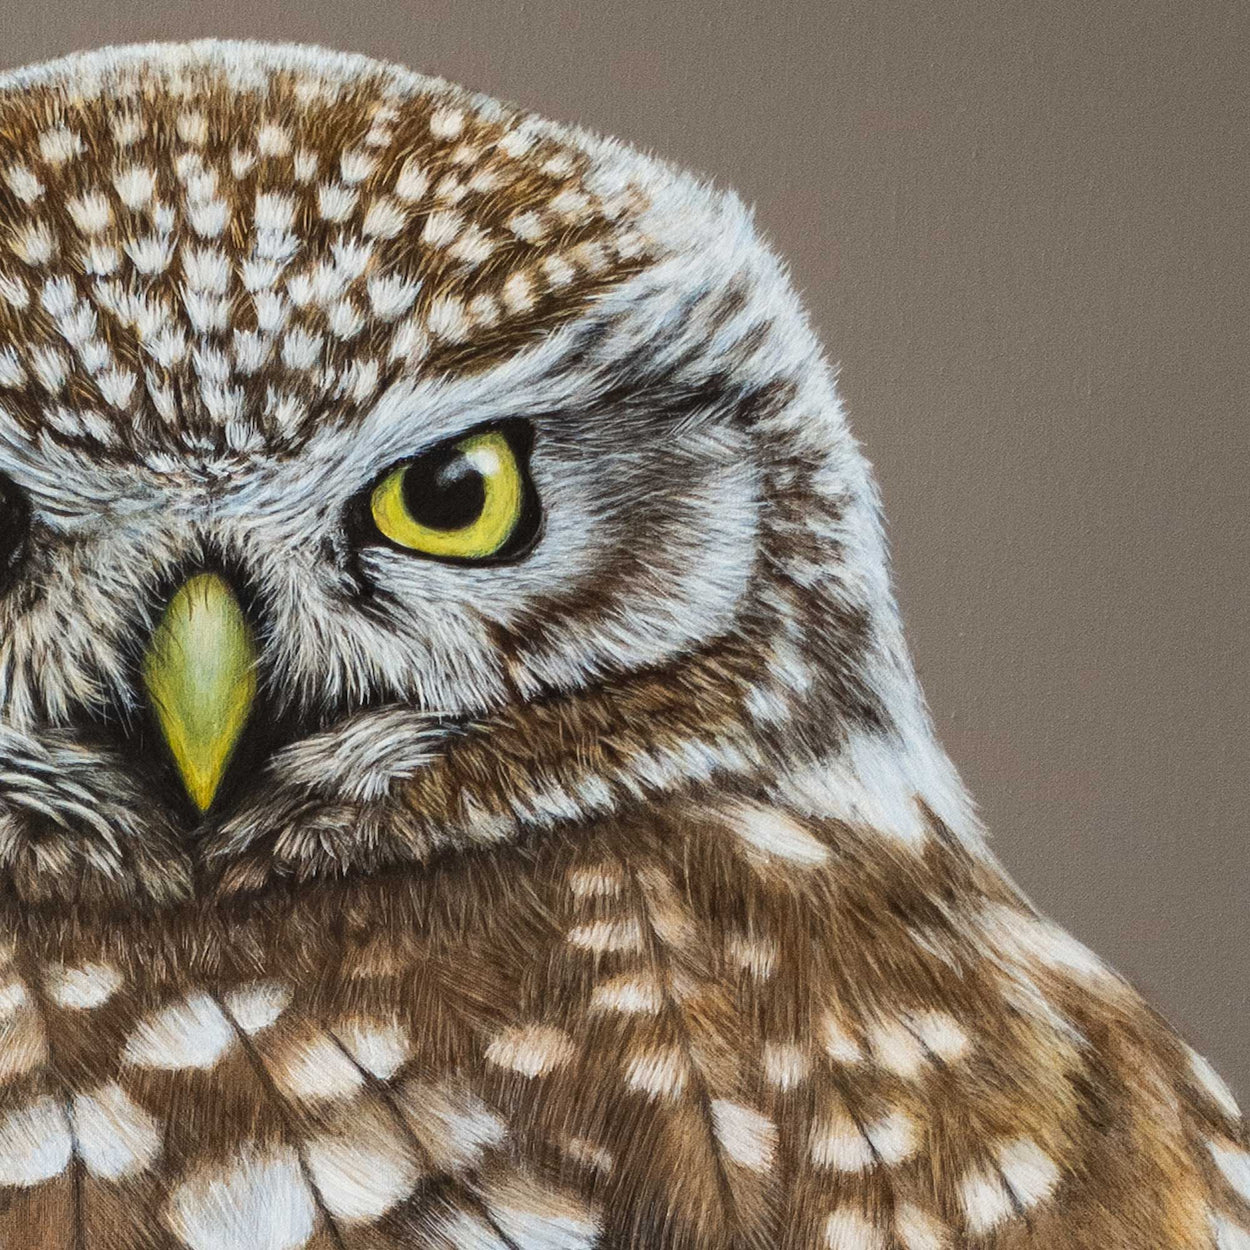 close-up of the painting of a little owl face with eye and beak